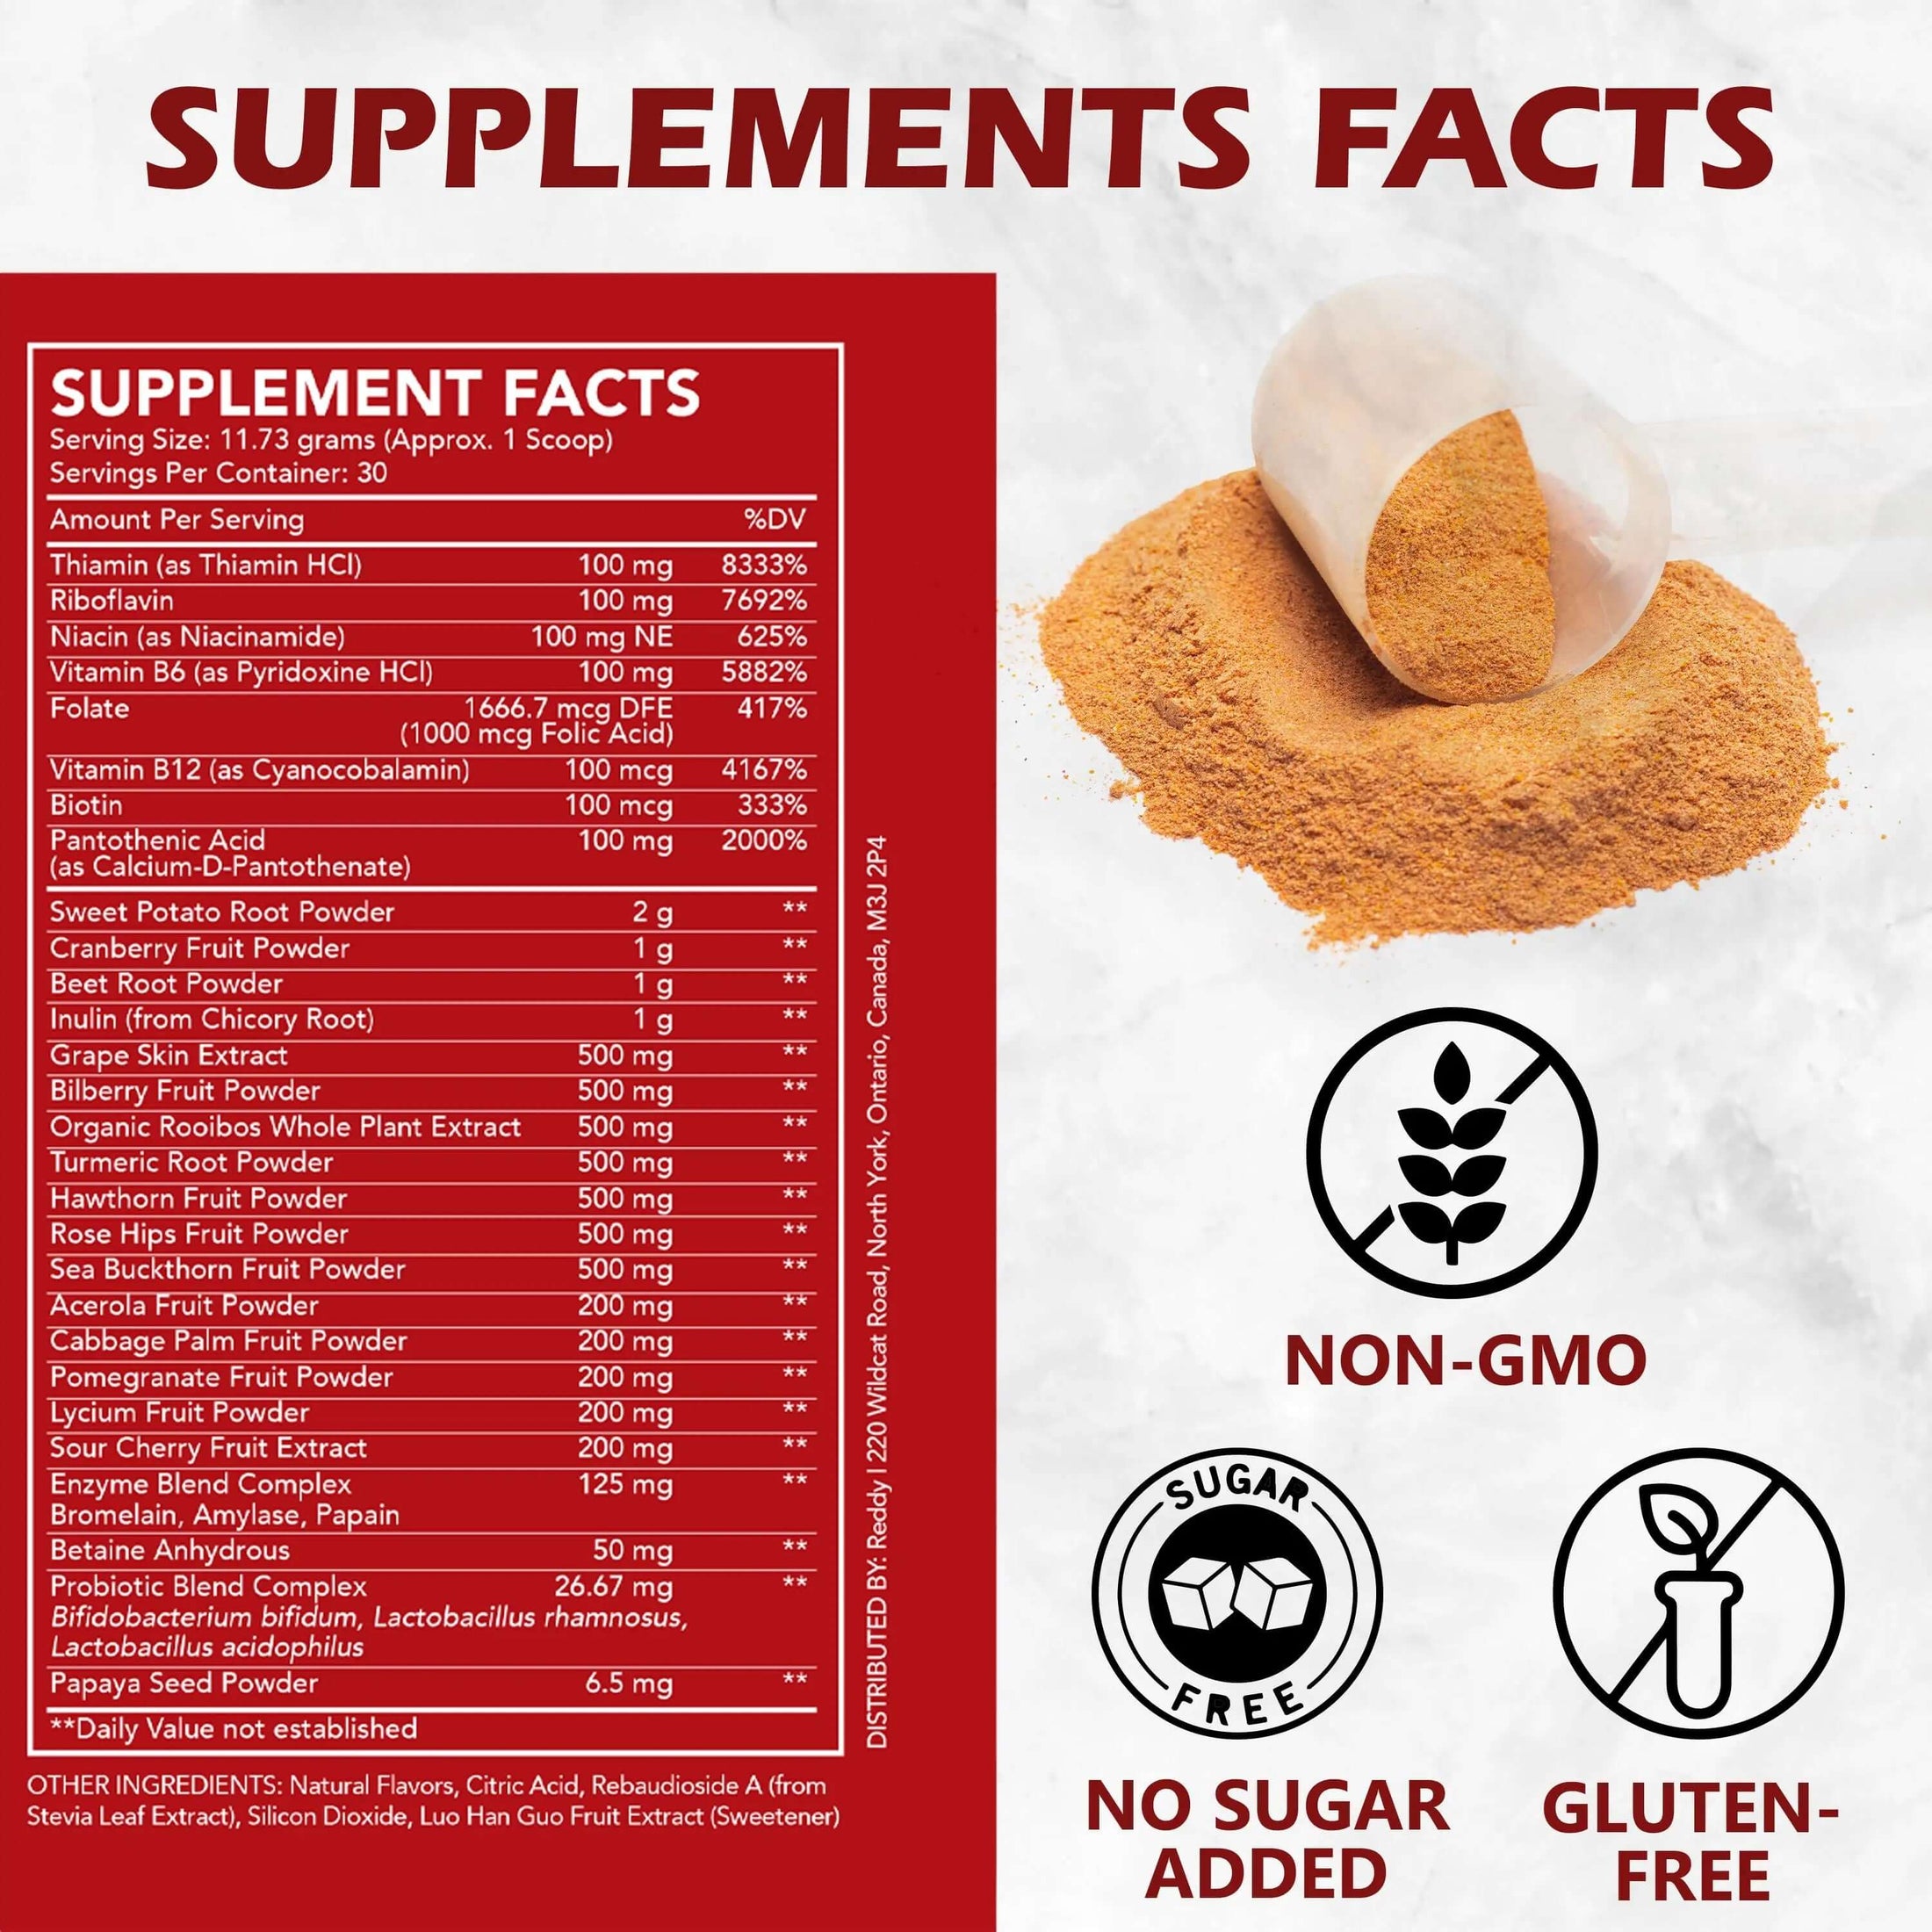 Close-up of the supplement facts label on Reddy Red Organic Superfood Powder packaging, showing detailed nutritional information including vitamin content and serving size.